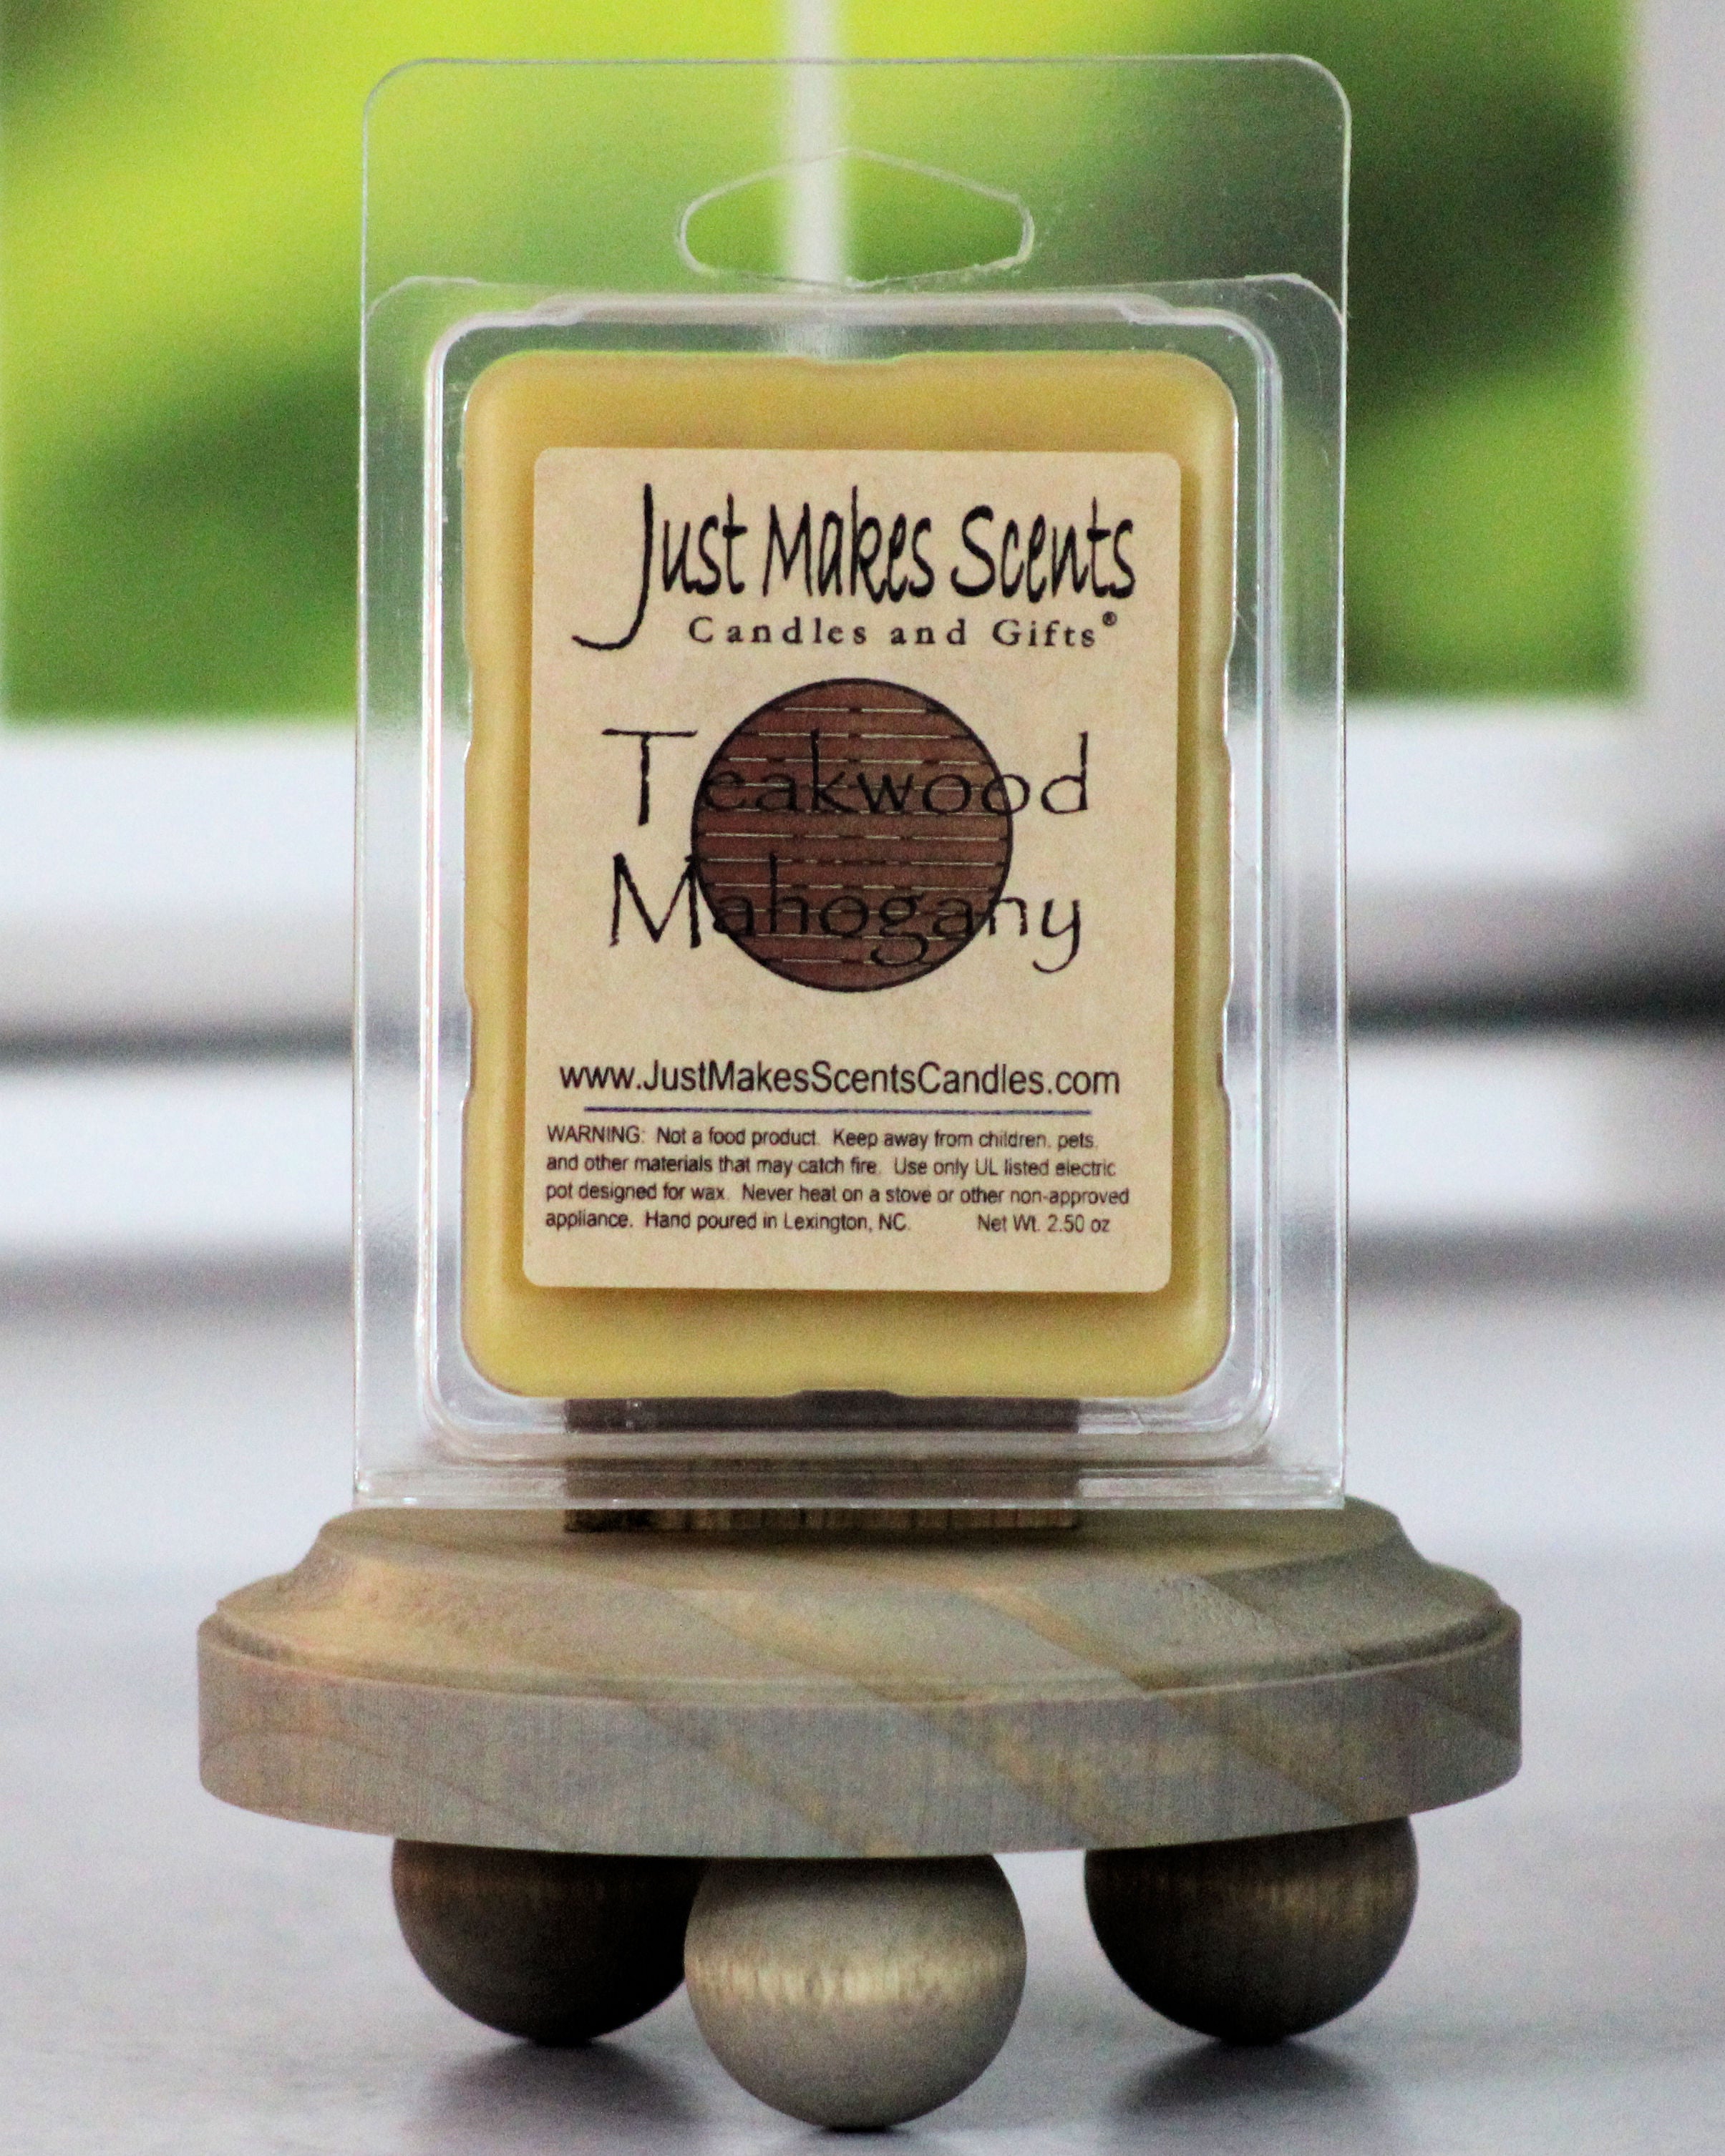 Mahogany Teakwood Wax Melt Manly Wax Melt Manly Scent Earthy Wax Melt  Cologne Scent Gift for Him Gift for Her -  Canada